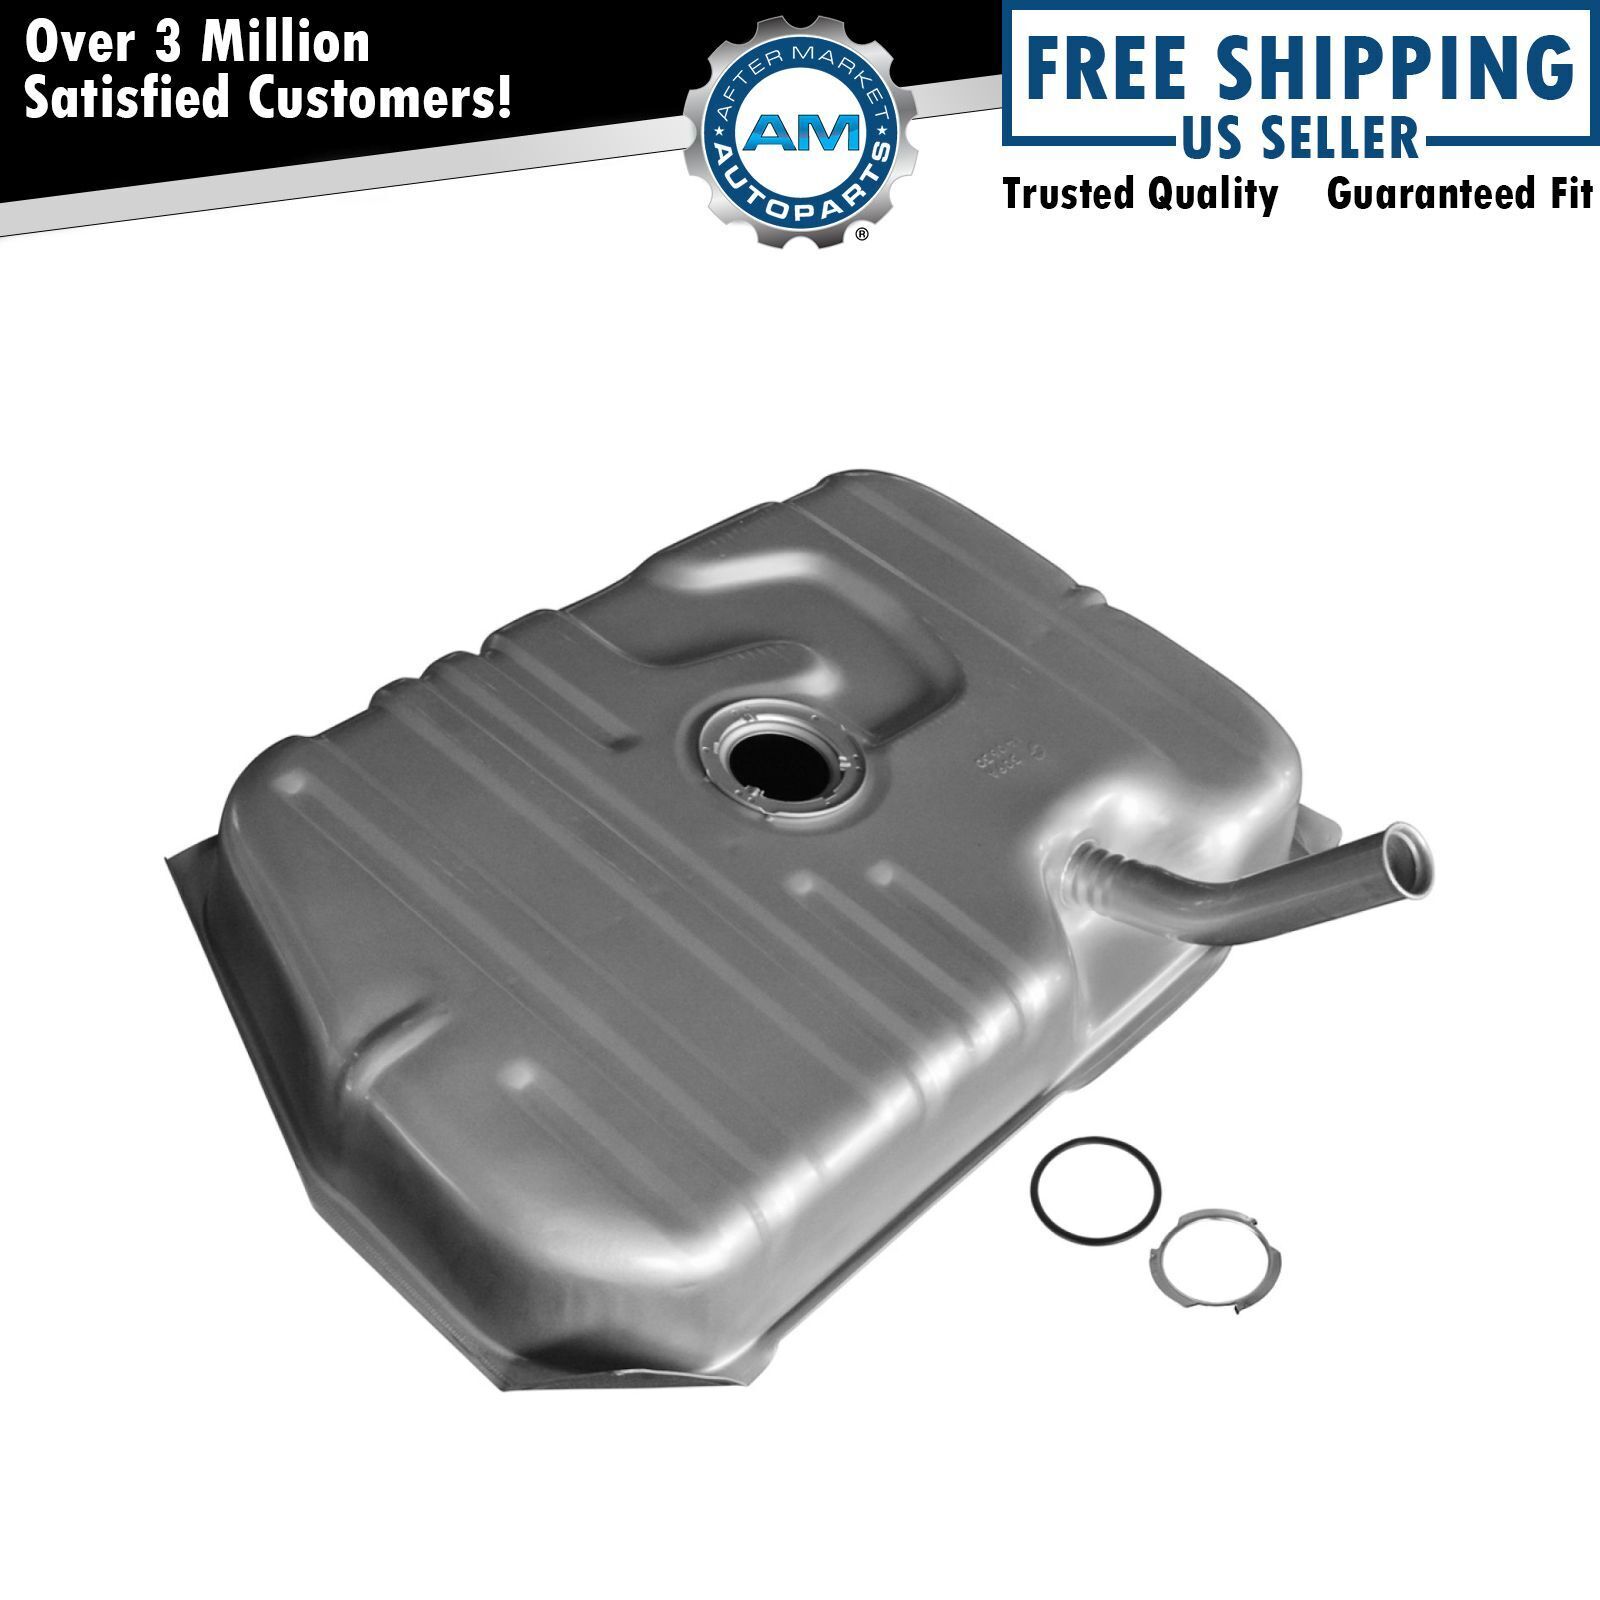 Fuel Gas Tank 17 Gallon NEW for Olds Cutlass 2 Door Coupe